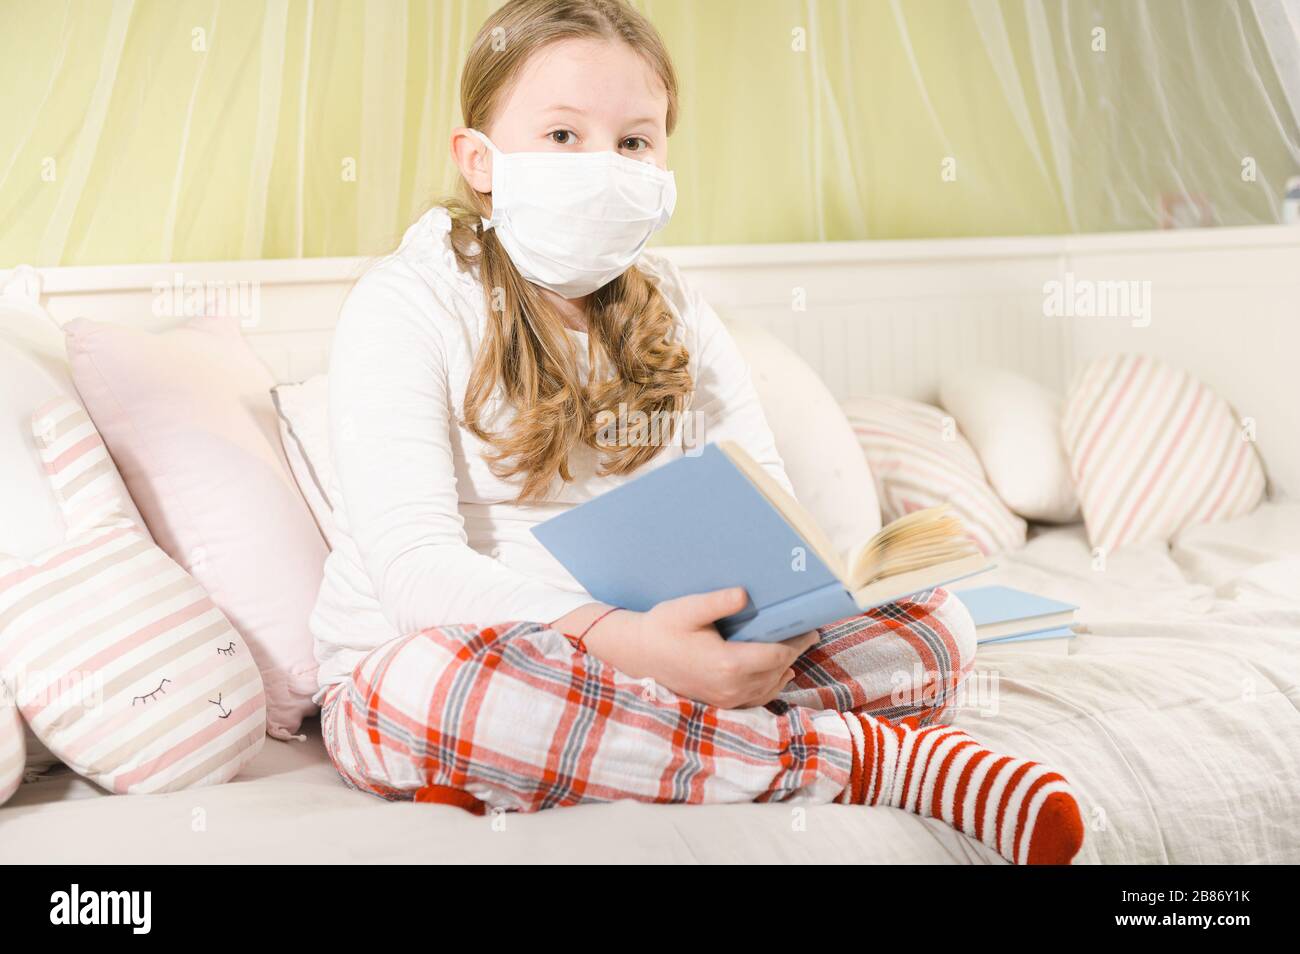 Girl reading a book during quarantine on the bed. Stock Photo